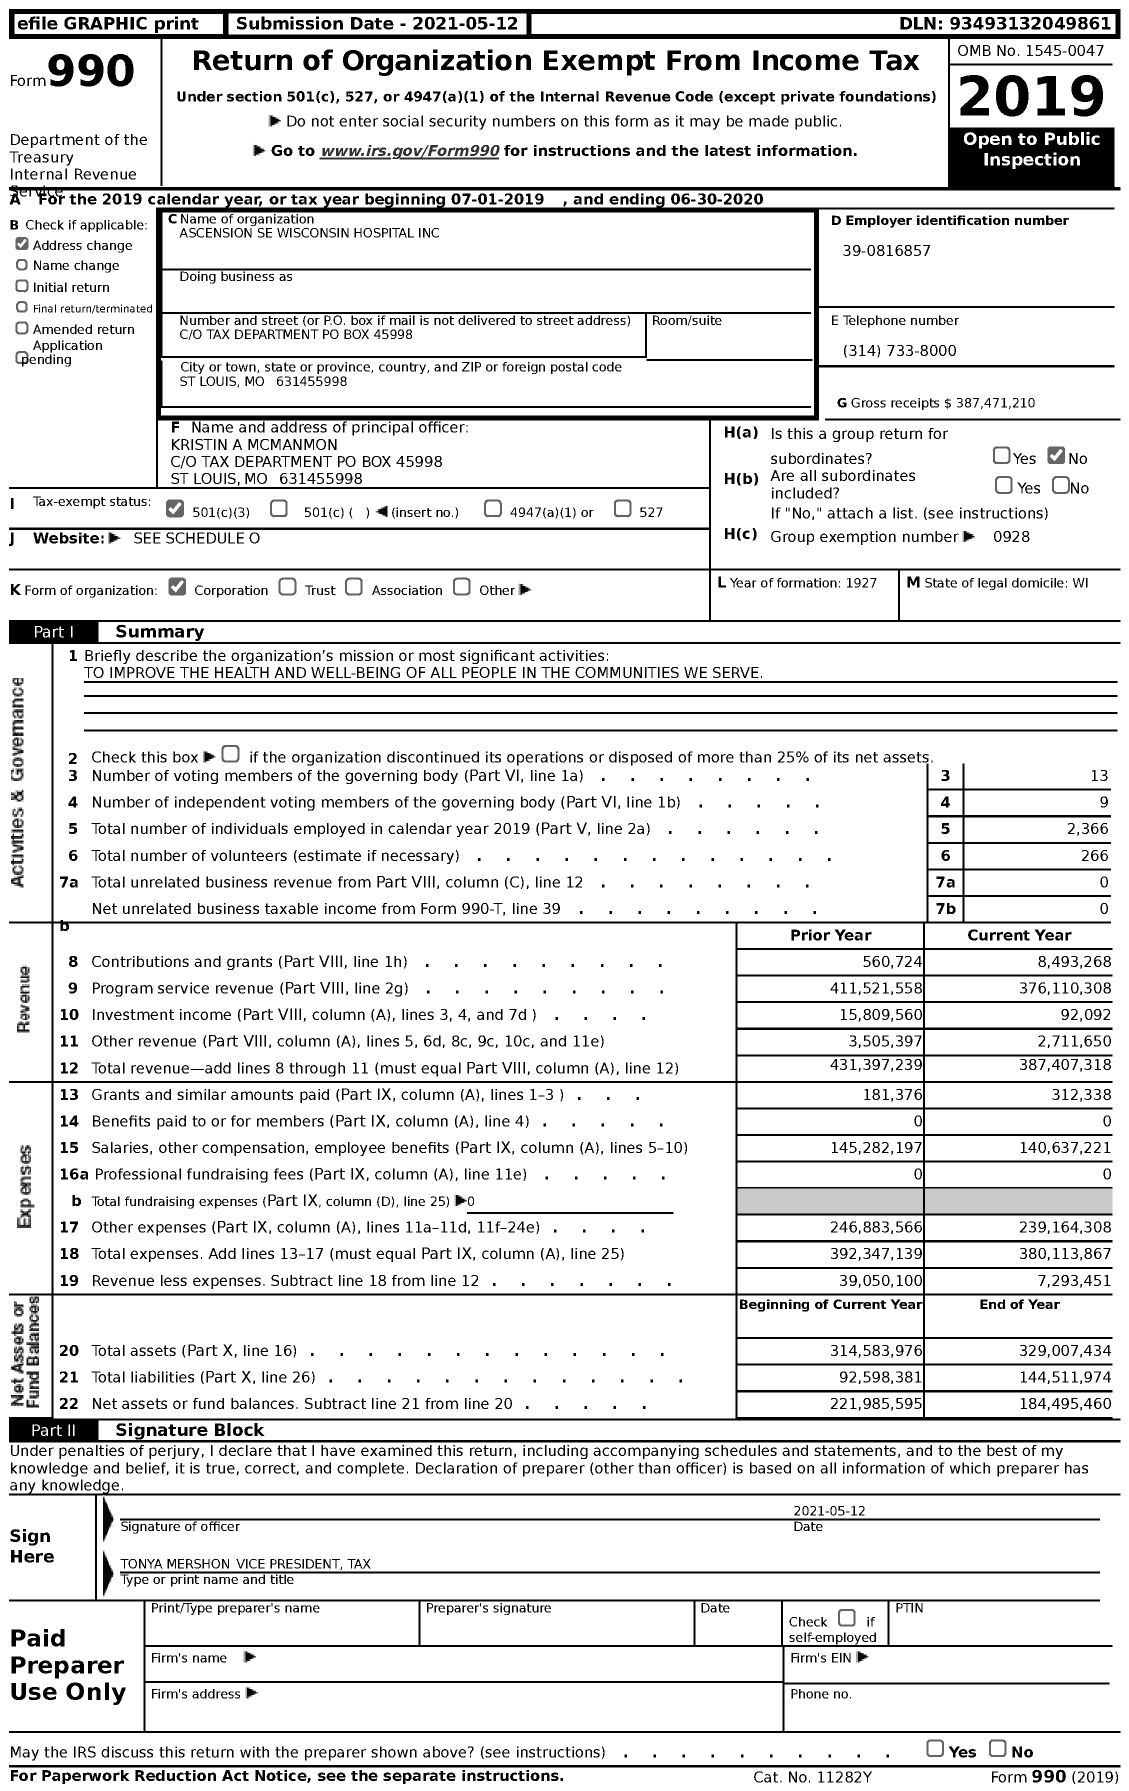 Image of first page of 2019 Form 990 for Ascension SE Wisconsin Hospital